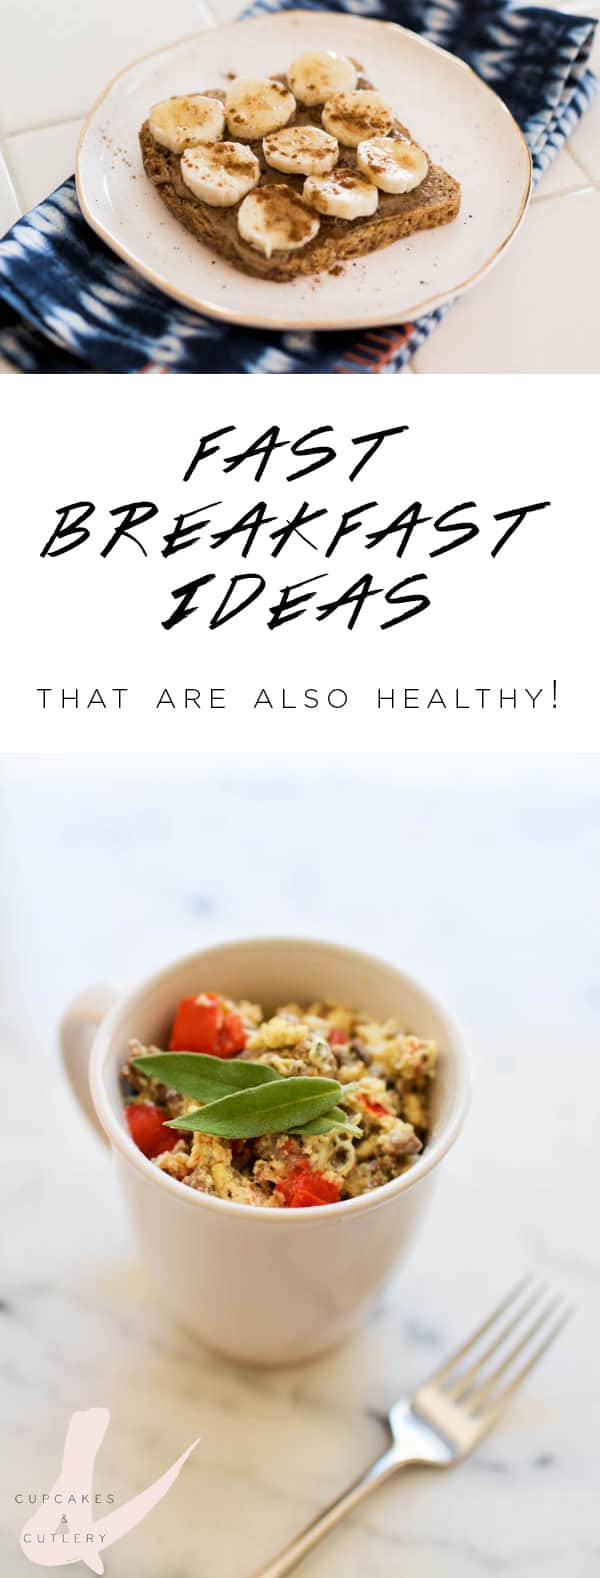 Fast breakfast ideas for busy women on the go. These quick an easy recipes will get you out the door fast. #healthyitup #breakfast #cupcakesandcutlery